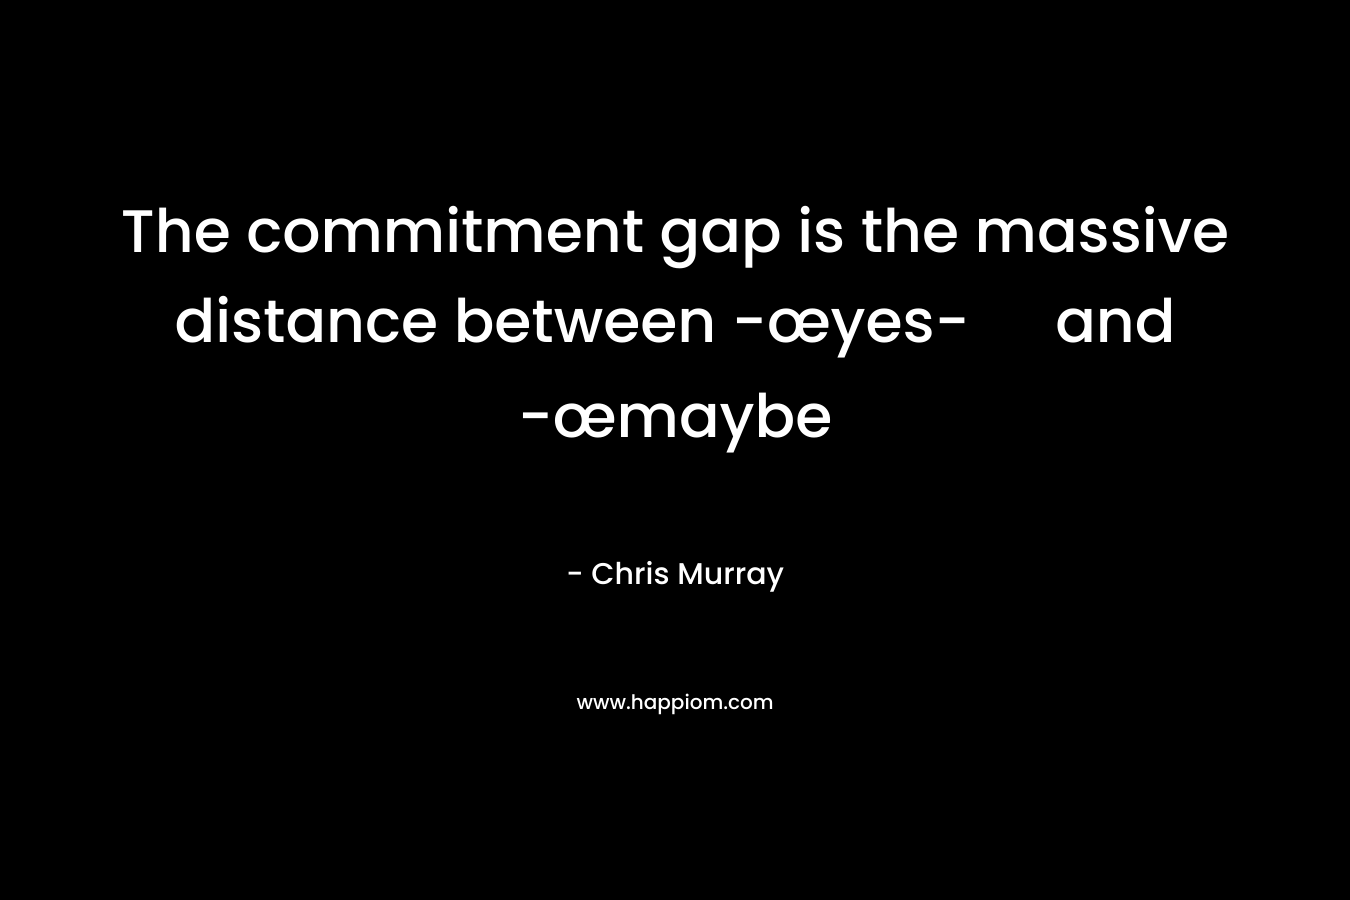 The commitment gap is the massive distance between -œyes- and -œmaybe